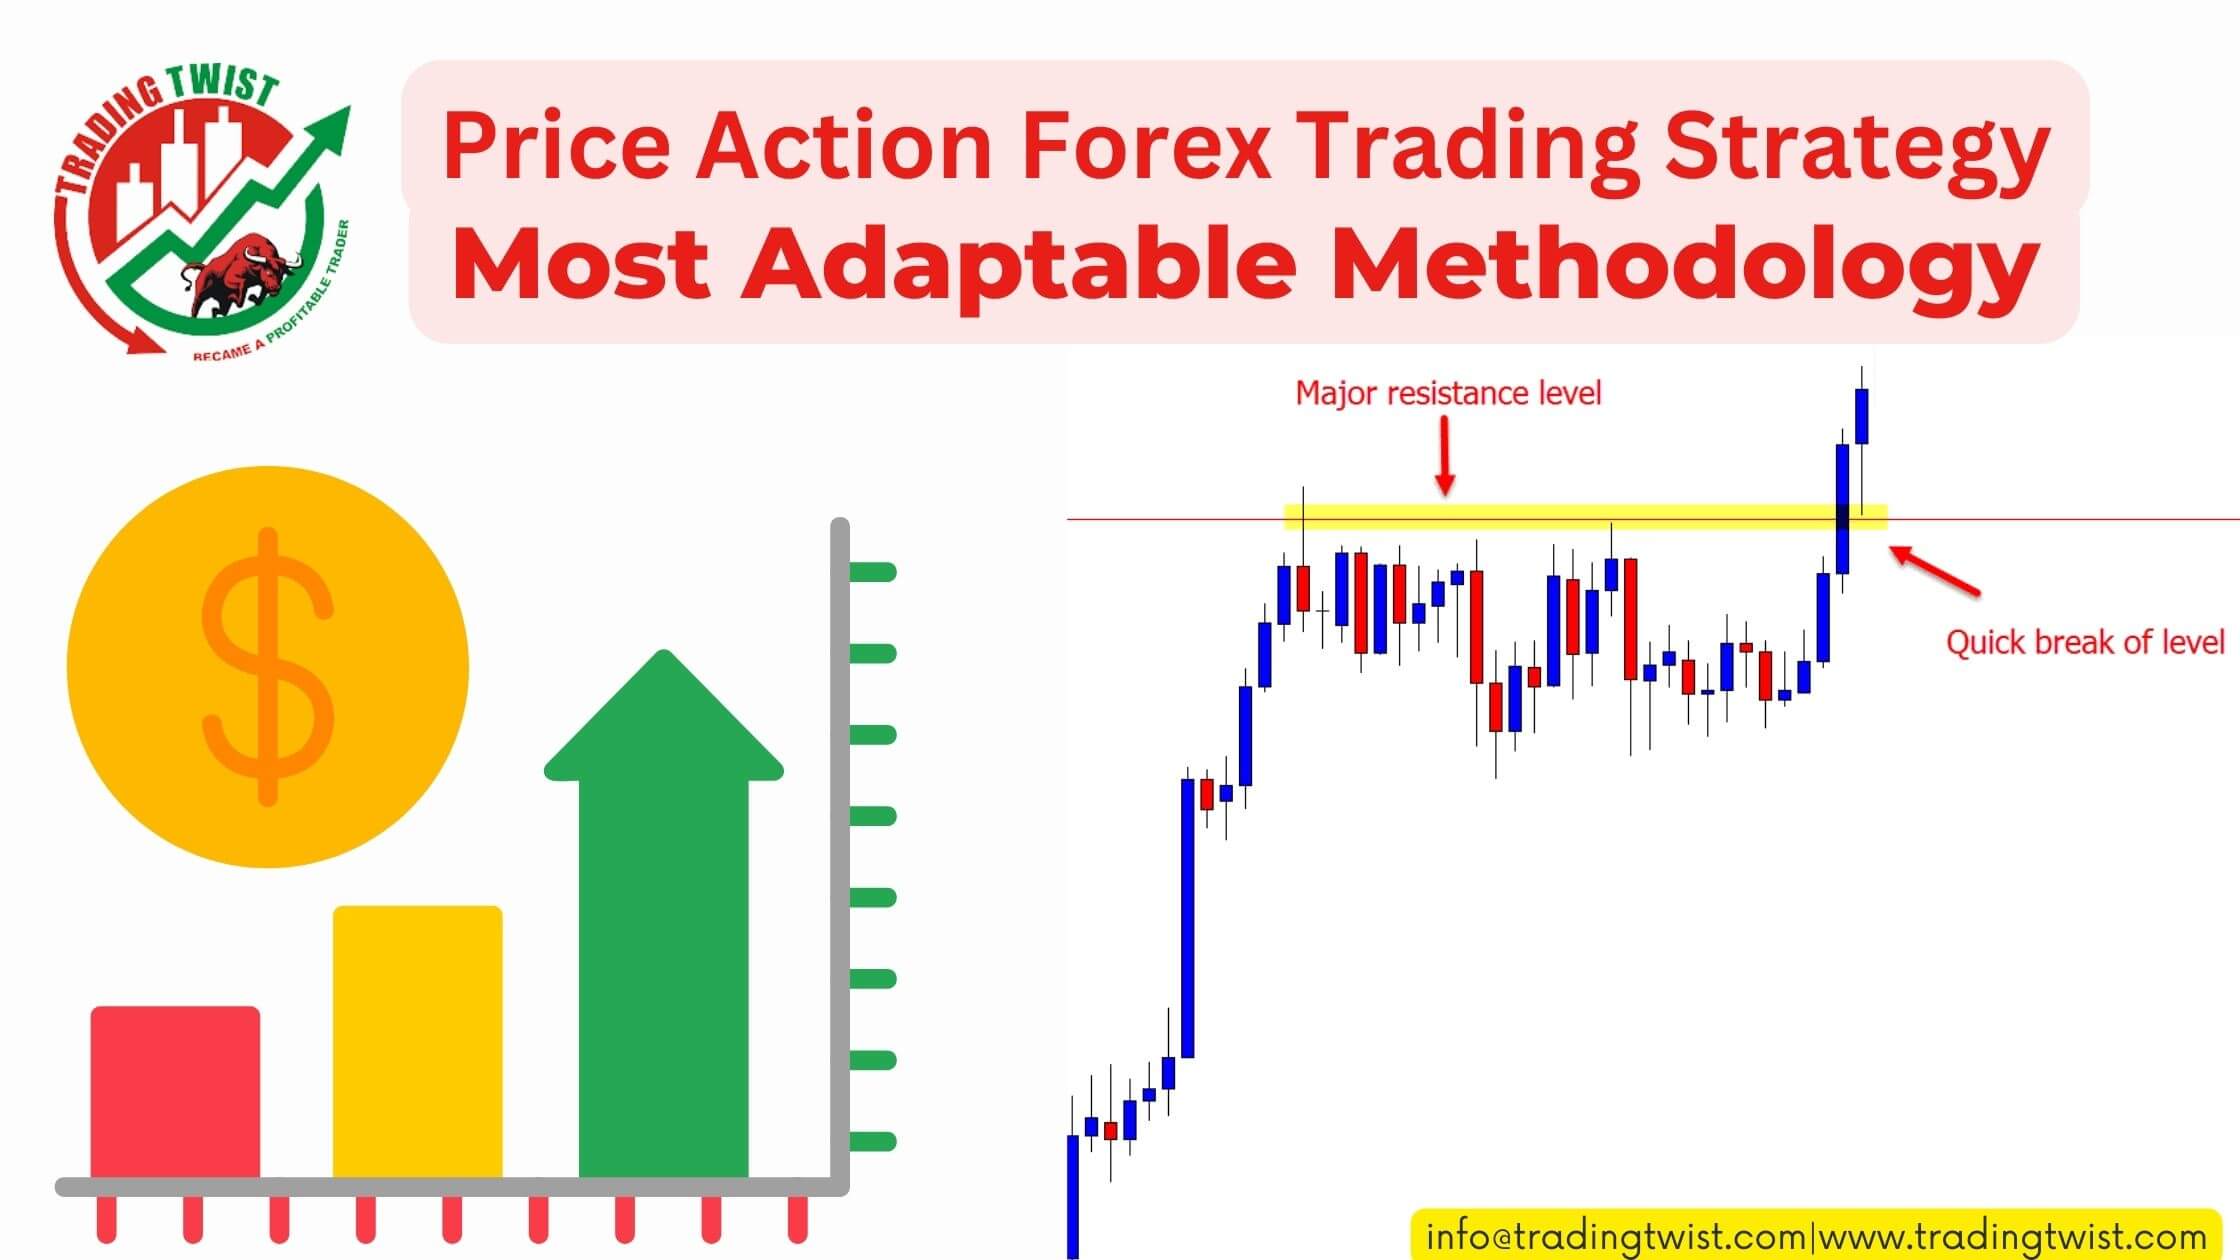 Price Action Forex Trading Strategy